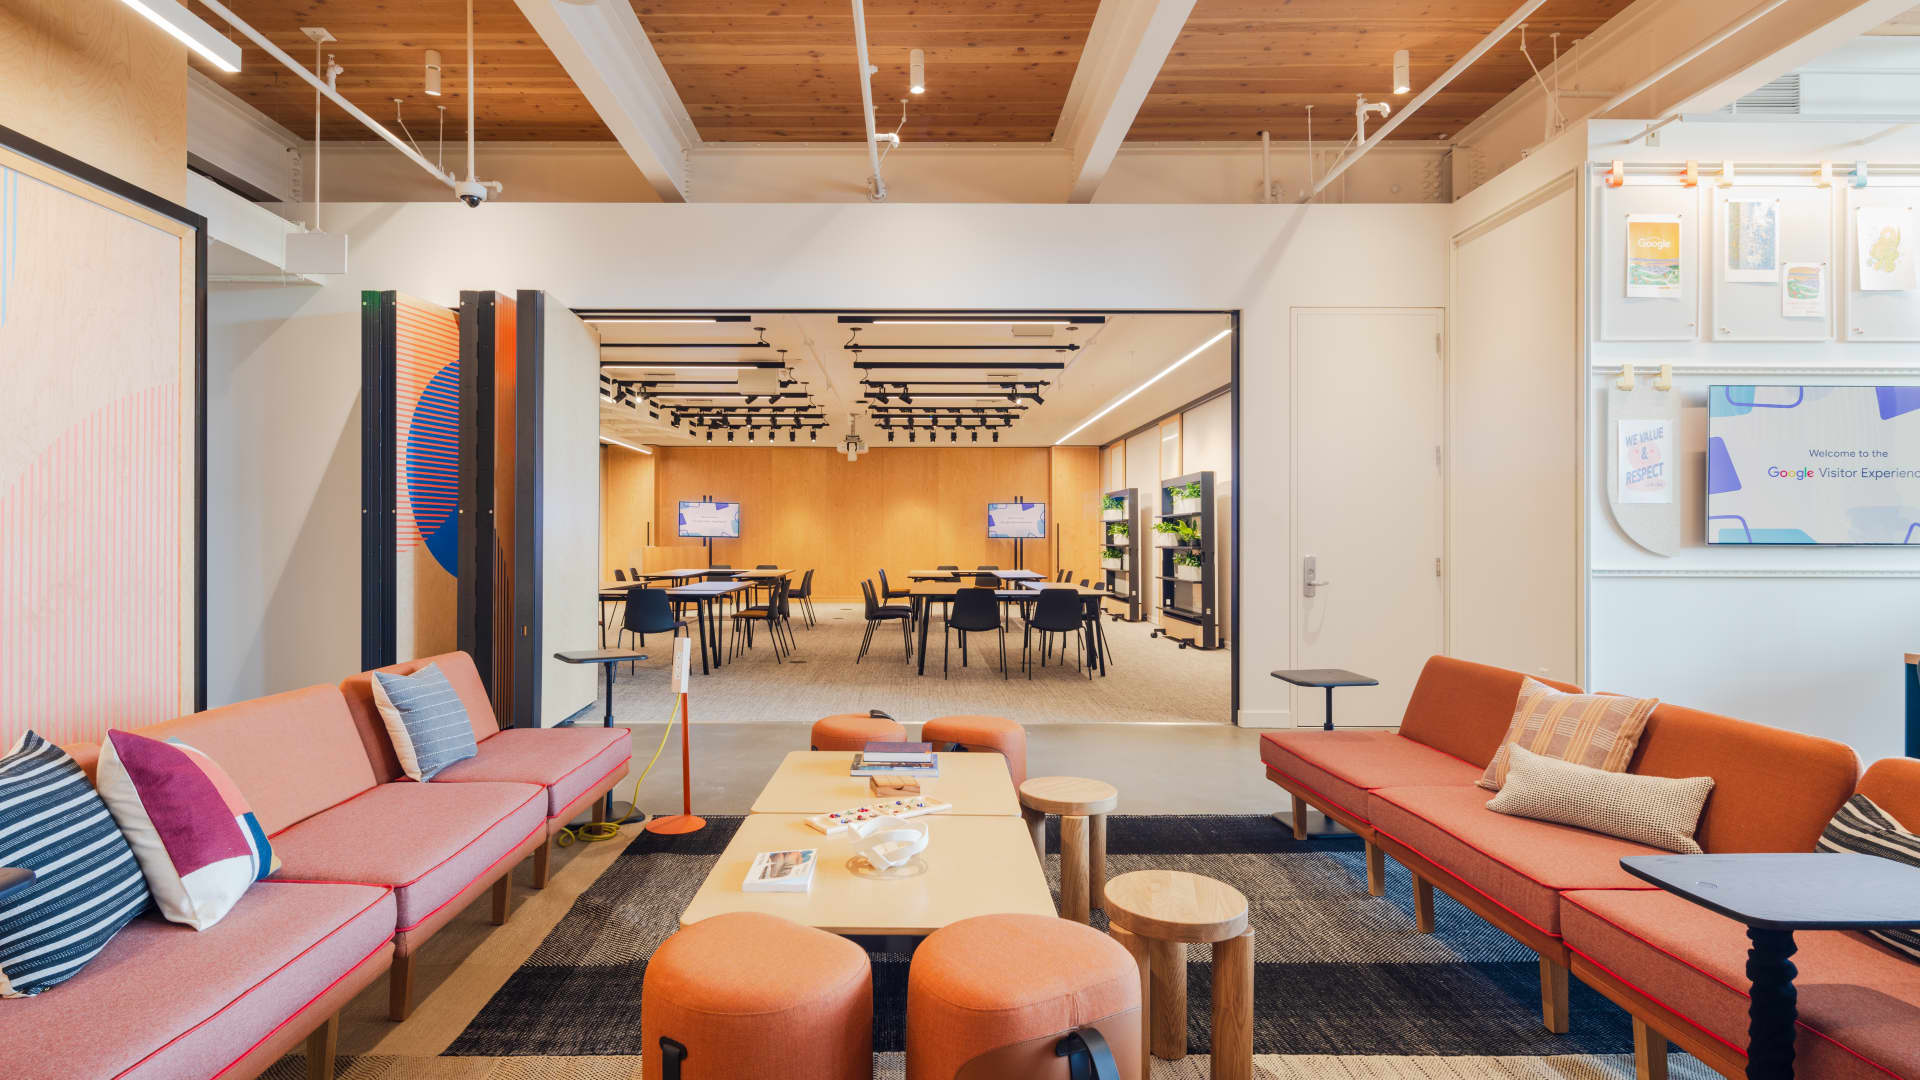 Google's new visitor center feature a space where a community group or nonprofit can request to reserve the space for meetings or events.